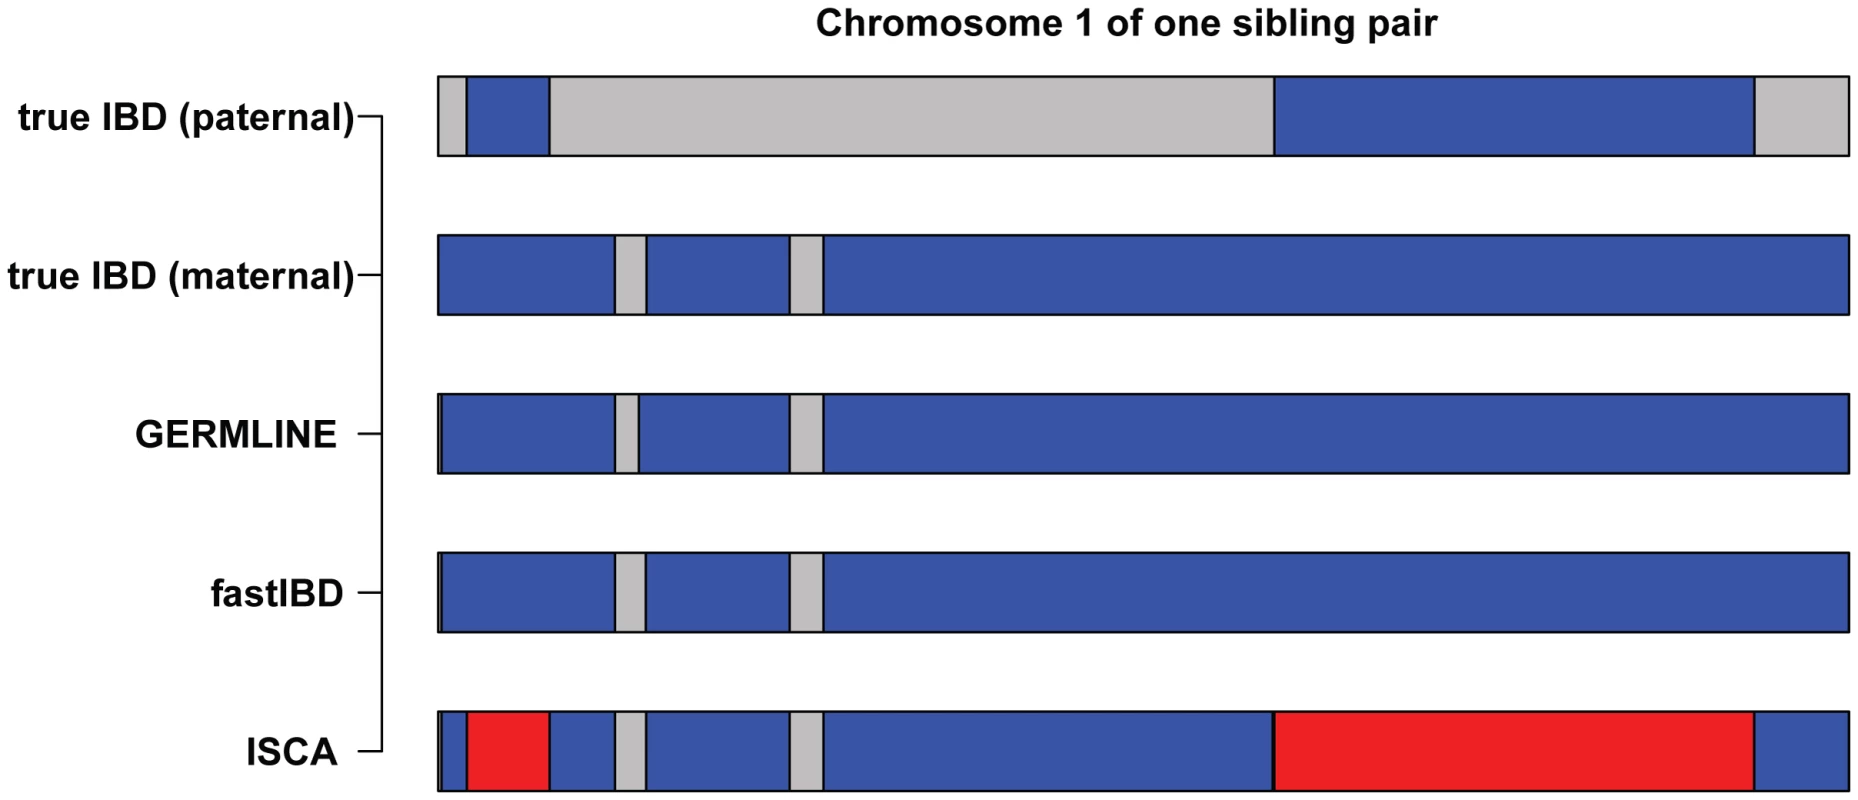 Comparison of IBD inferred by GERMLINE, fastIBD, and ISCA.